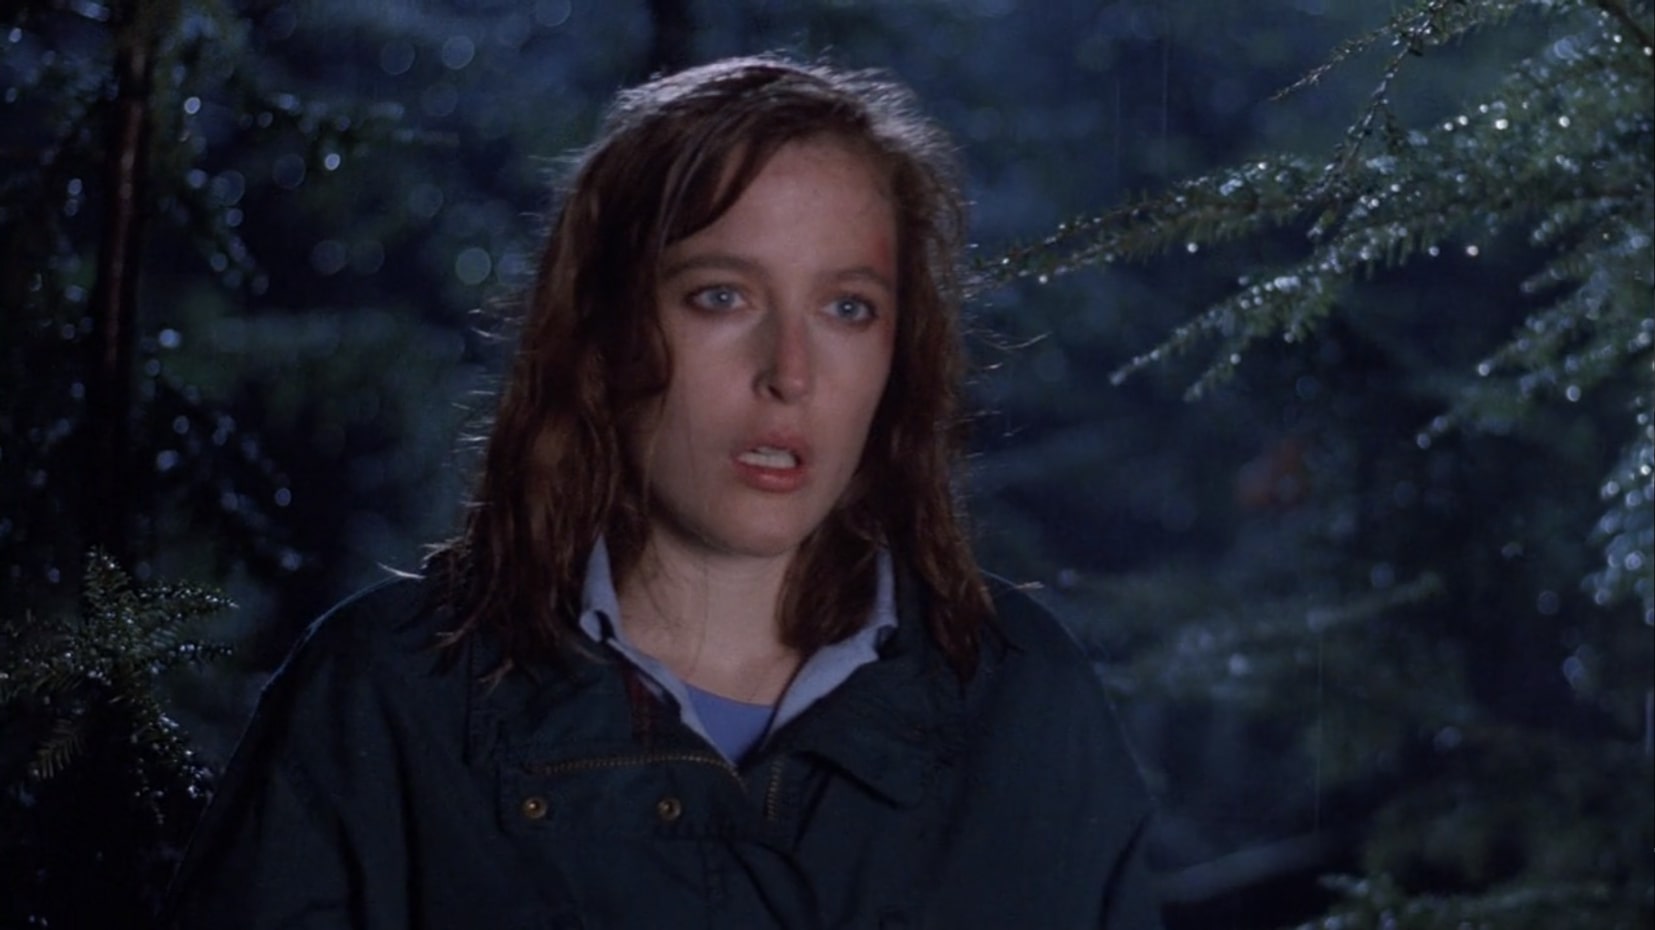 It's nighttime. Scully is in the woods and she's staring agape at something in the distance. A bright light illuminates her face, bringing a small shine to her eyes. She has a red bruise on her left temple and brow. Her red hair looks bedraggled.